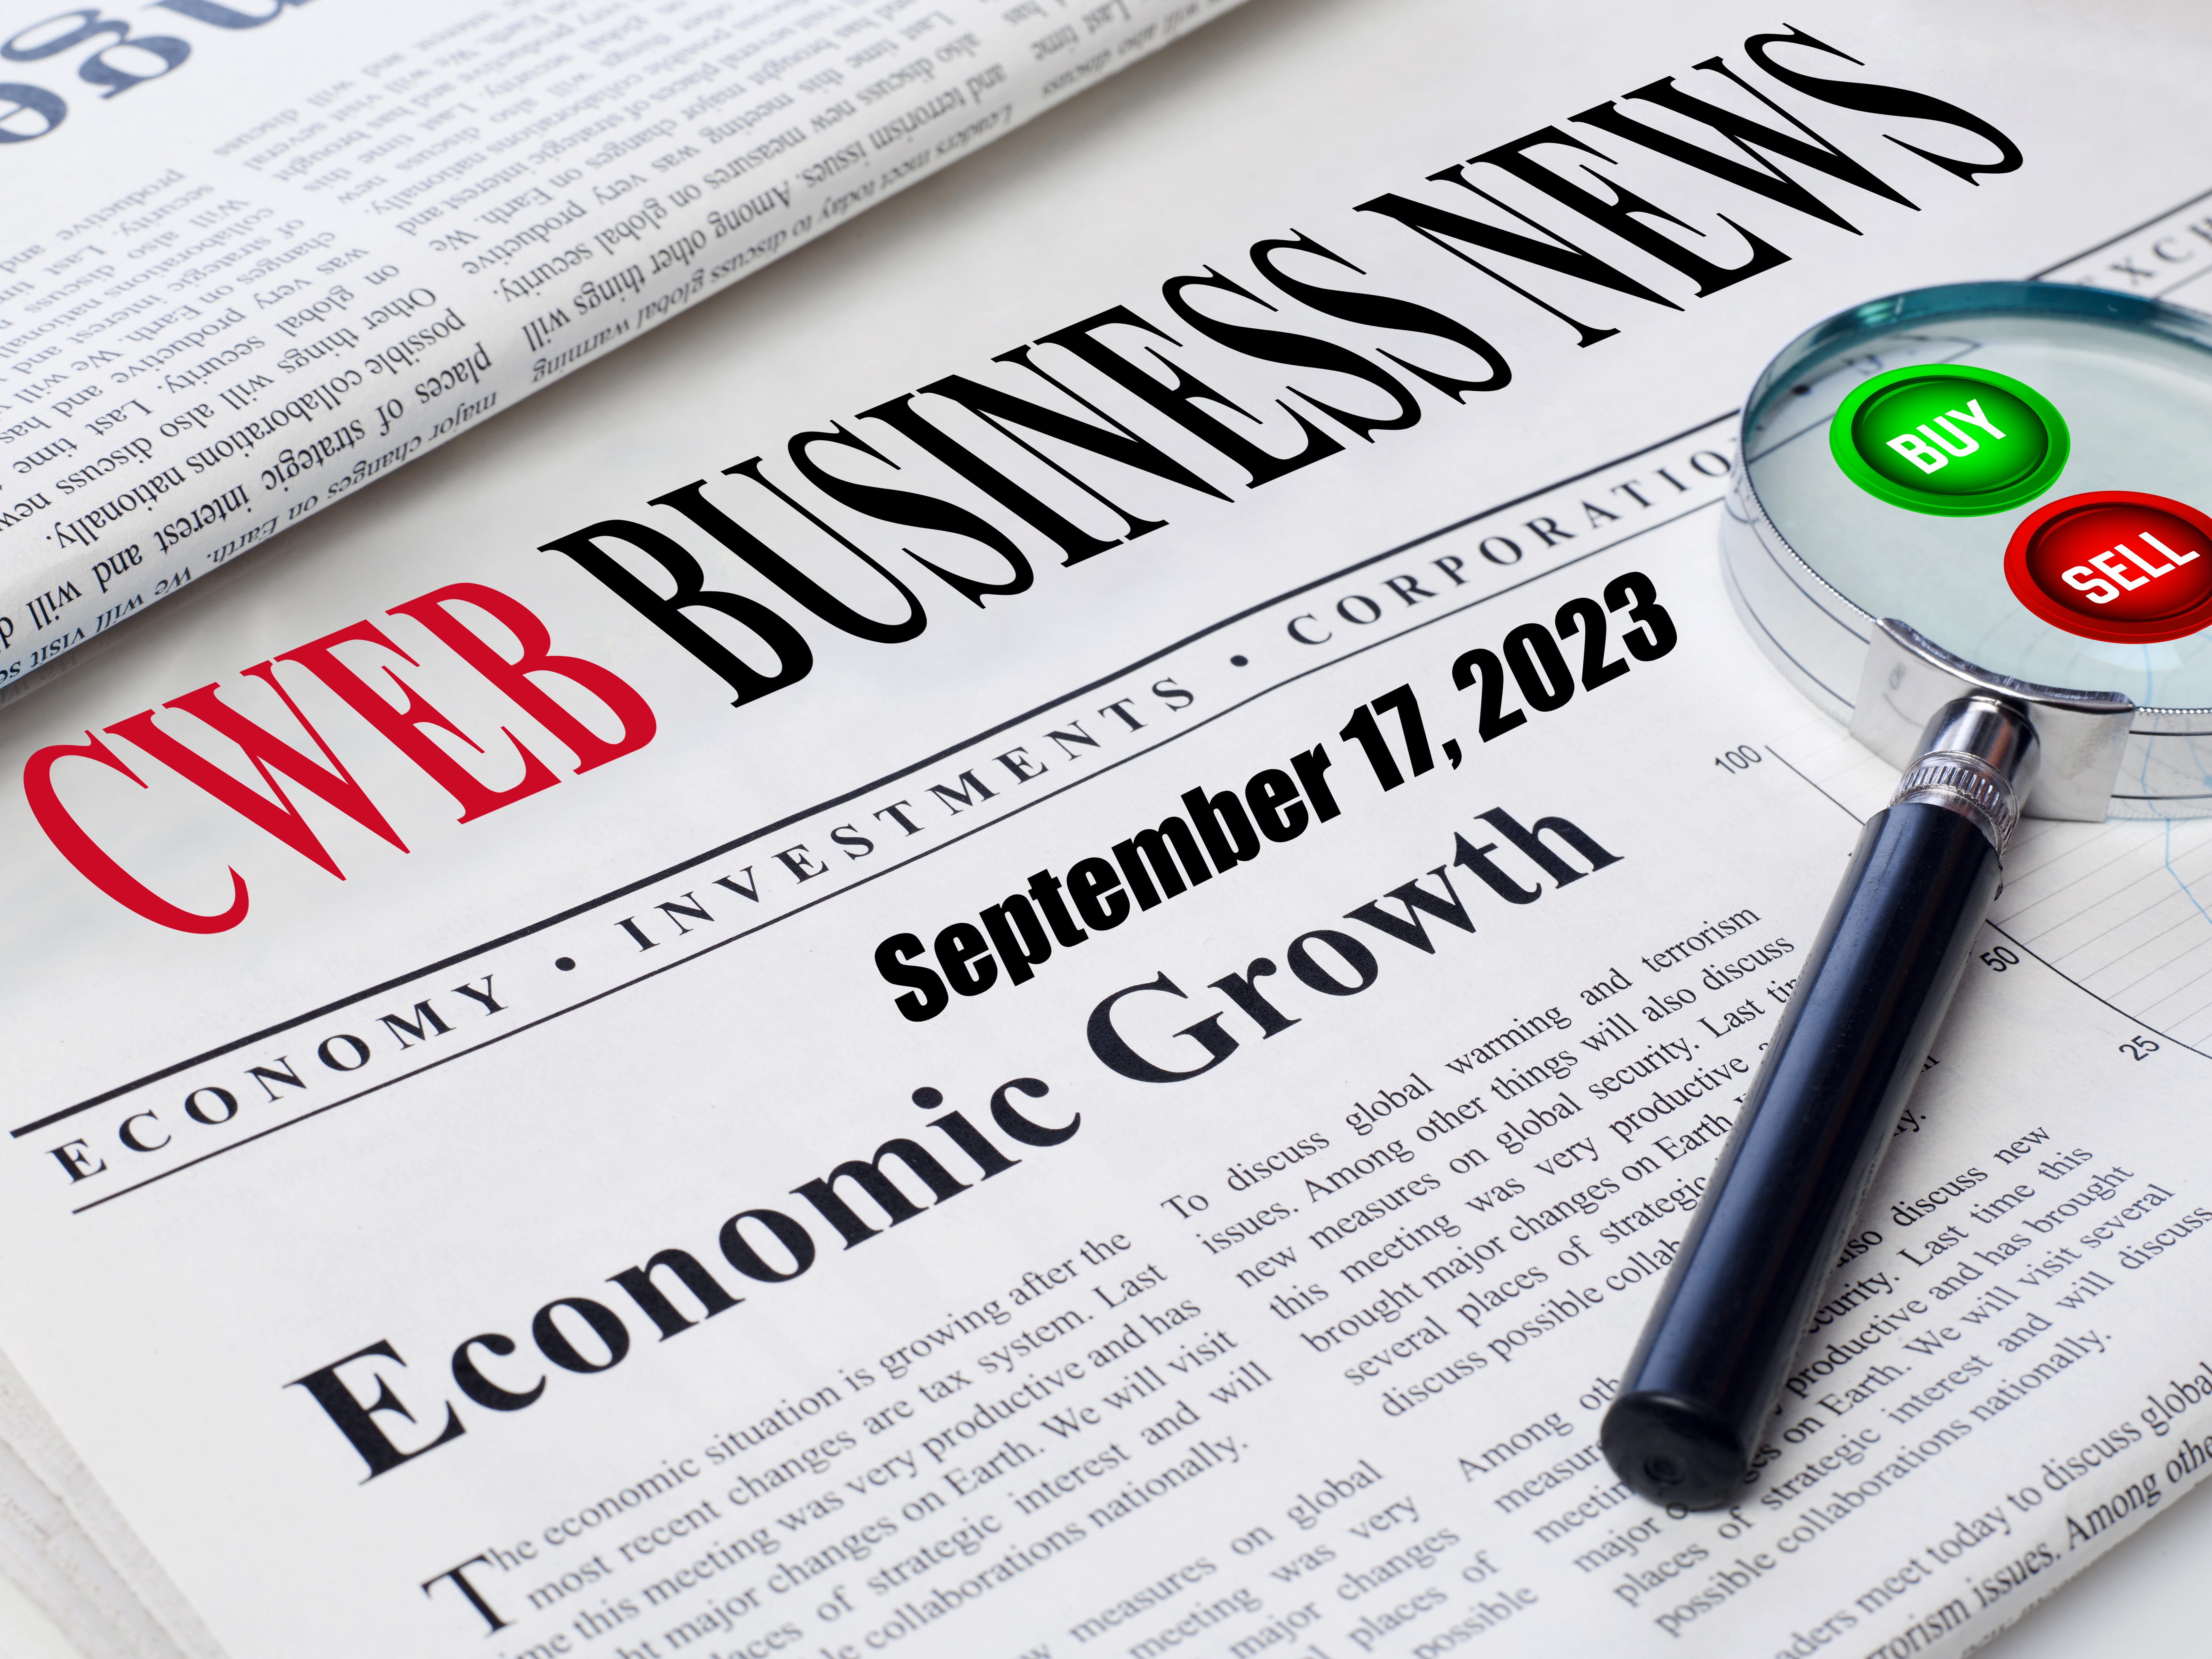 CWEB Releases Latest Business News Today and Other Updates - November 8, 2023